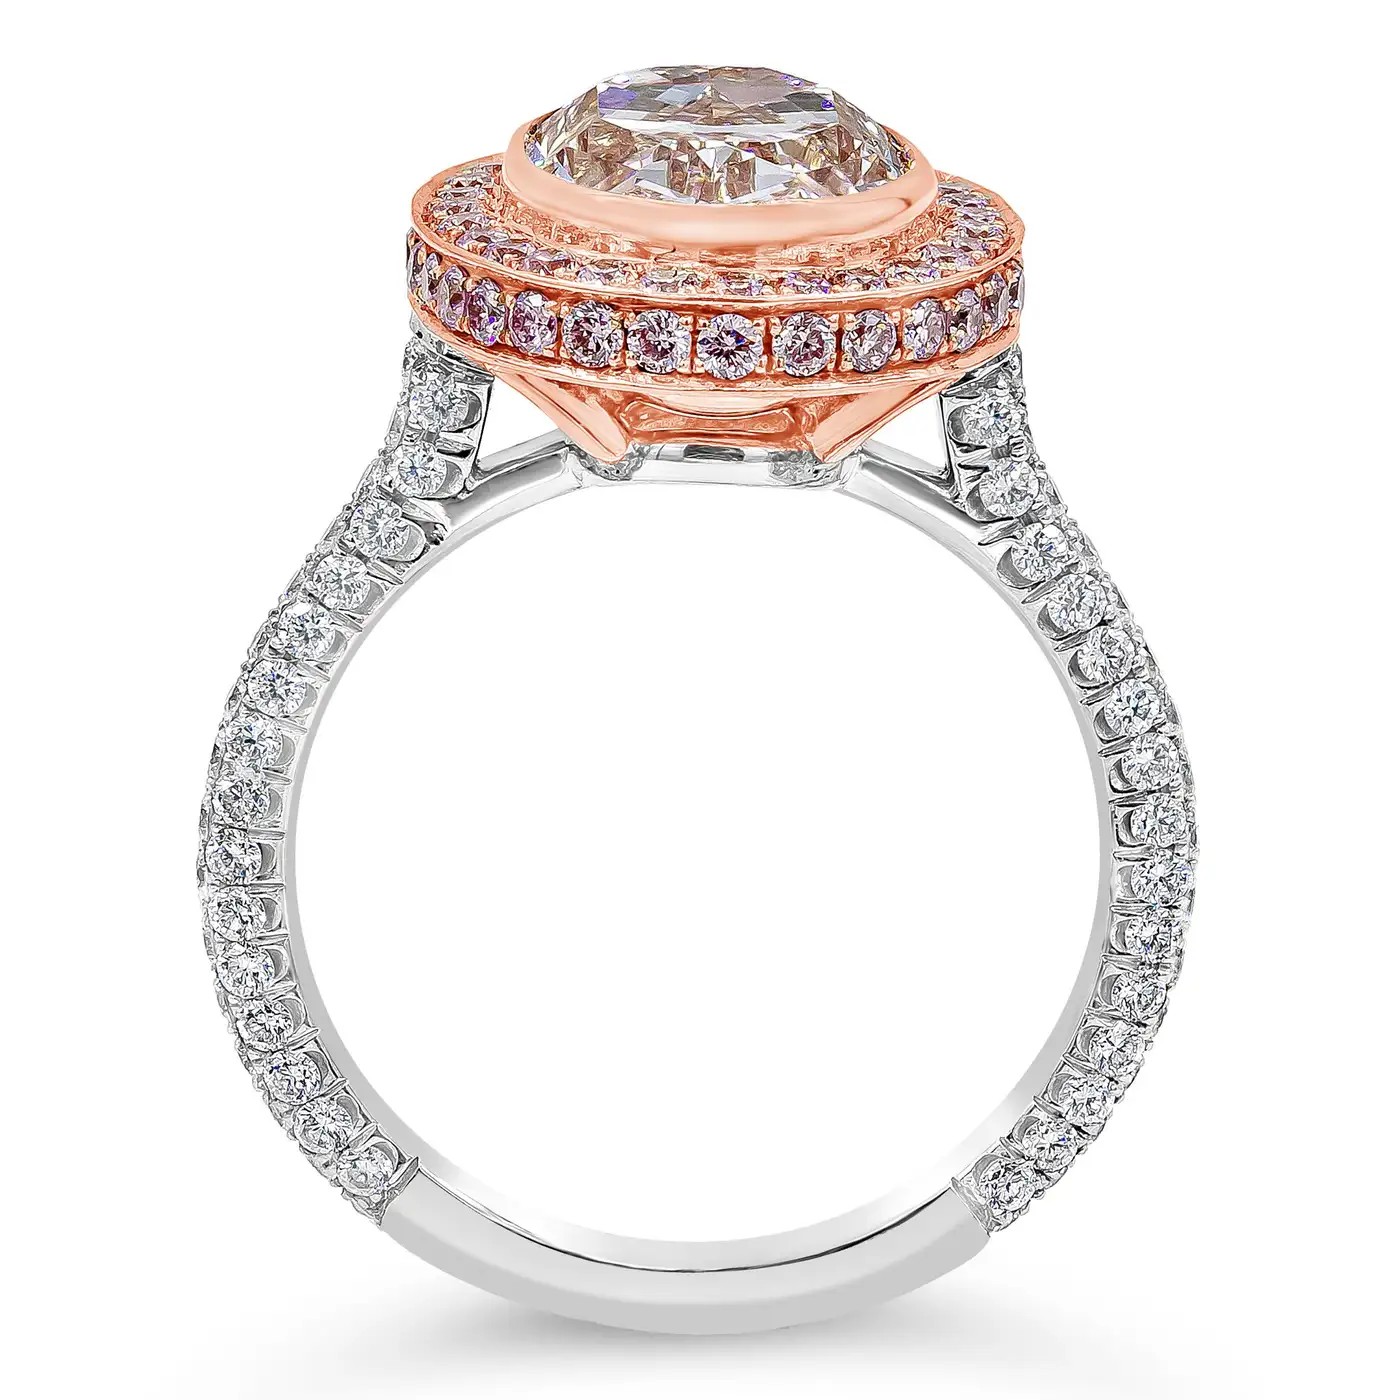 3.66-Oval-Cut-Fancy-Light-Pink-Diamond-Halo-Engagement-Ring-GIA-Certified-2.webp